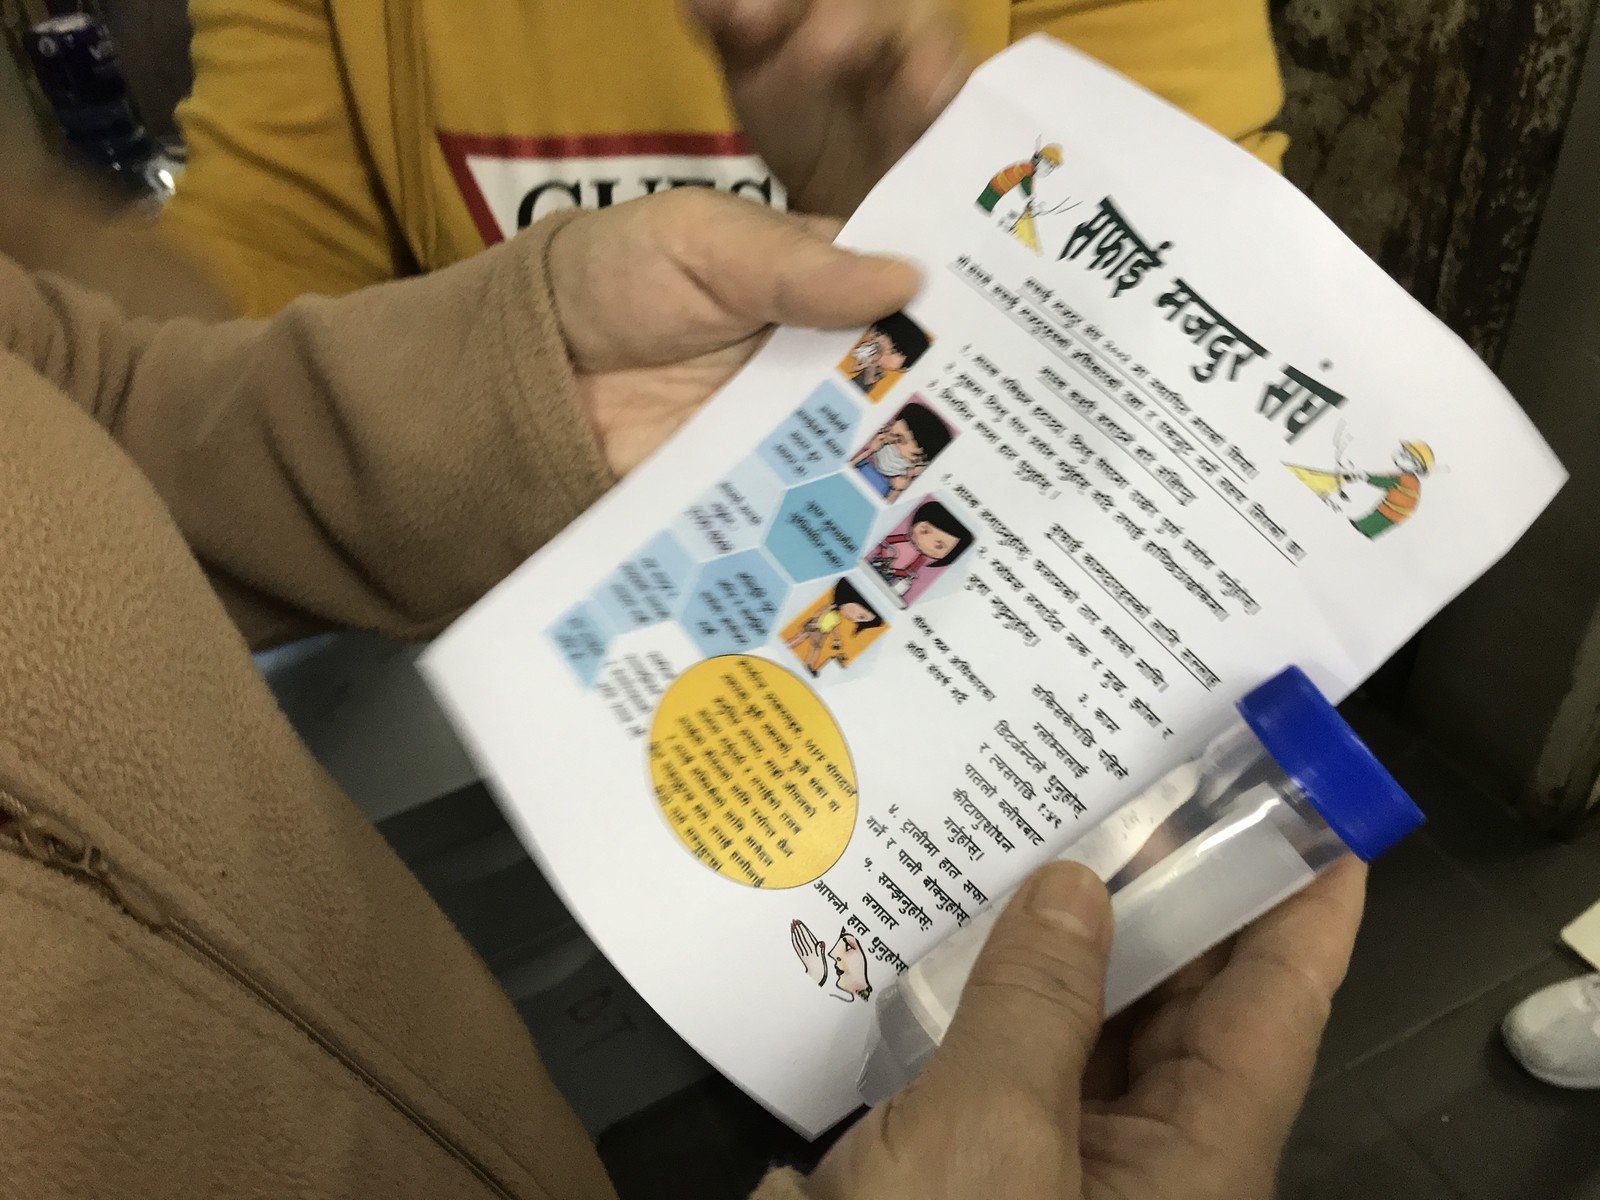 Some ethnic minority cleaners neither speak Chinese nor English. So, sharing hygiene information with them in their native language enables them to learn about sanitation more effectively. 